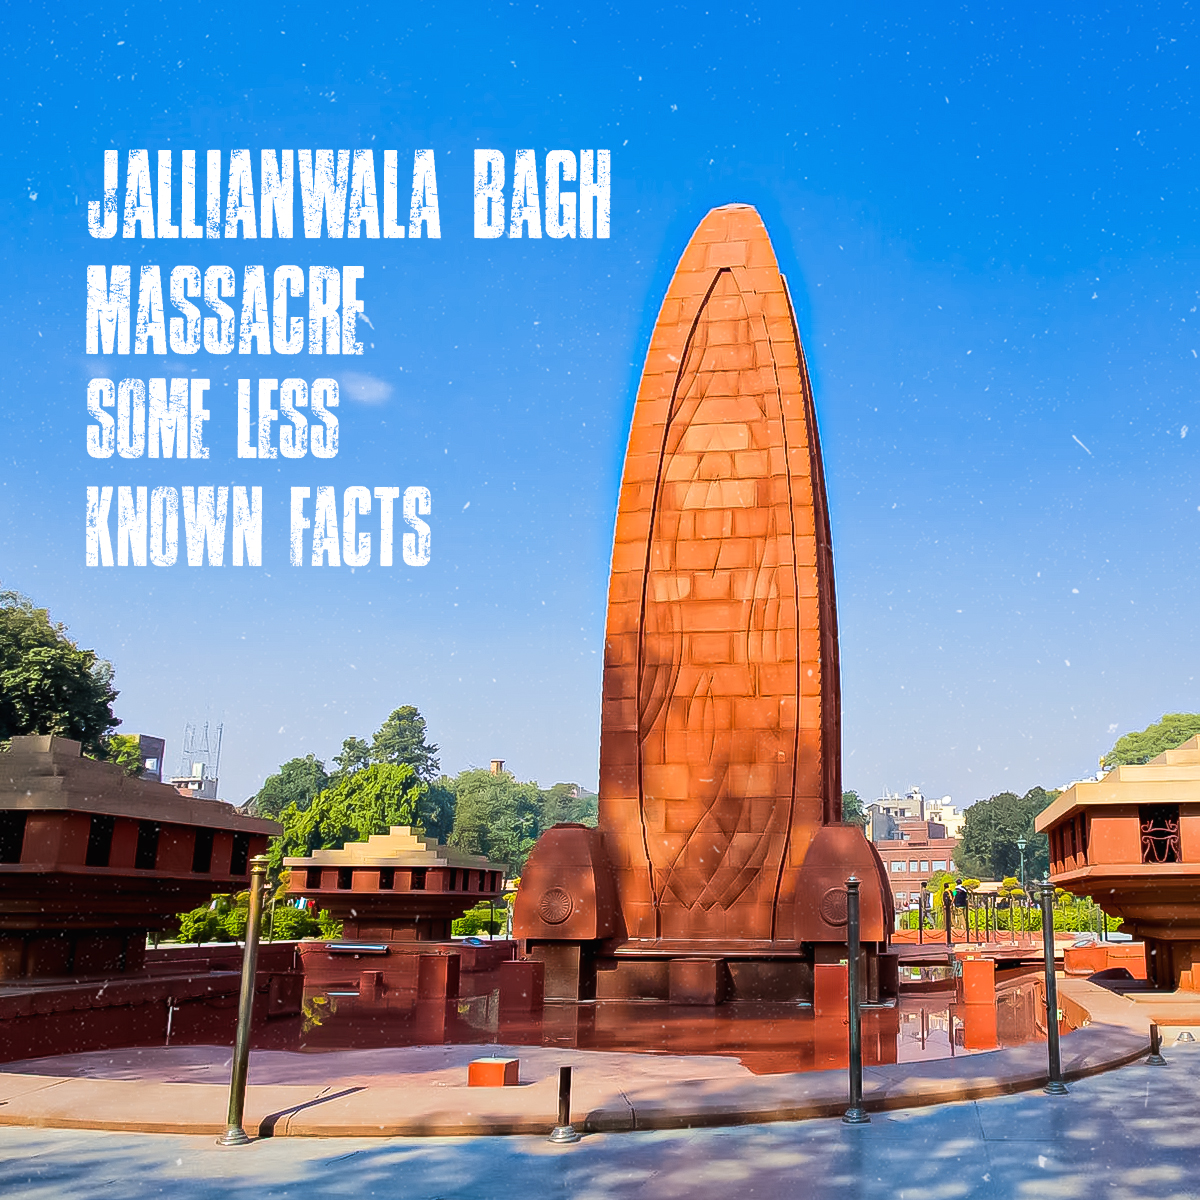 Jallianwala Bagh Massacre on April 13,1919,epitomized the cruelty of British colonialism in India. We pay tribute to the lives lost and honor their enduring legacy. Jai Hind! #OMTV #omtvexclusive #farmers #JallianwalaBagh #sikhhistory #Jawans